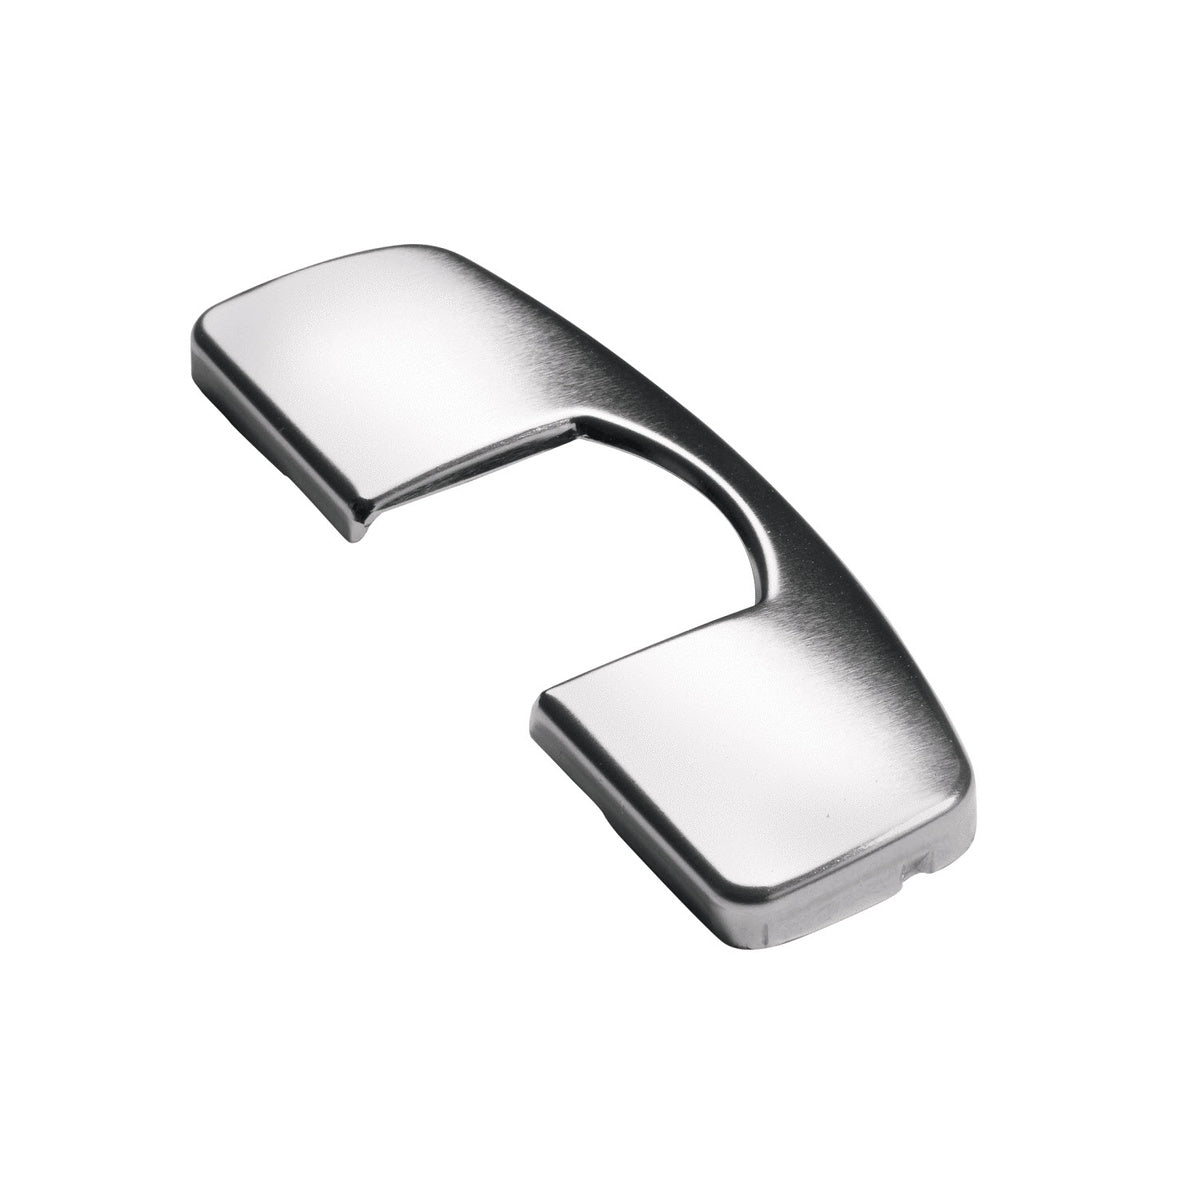 Hettich Cover cap for Sensys hinge arm and cup (embossed with Hettich logo)